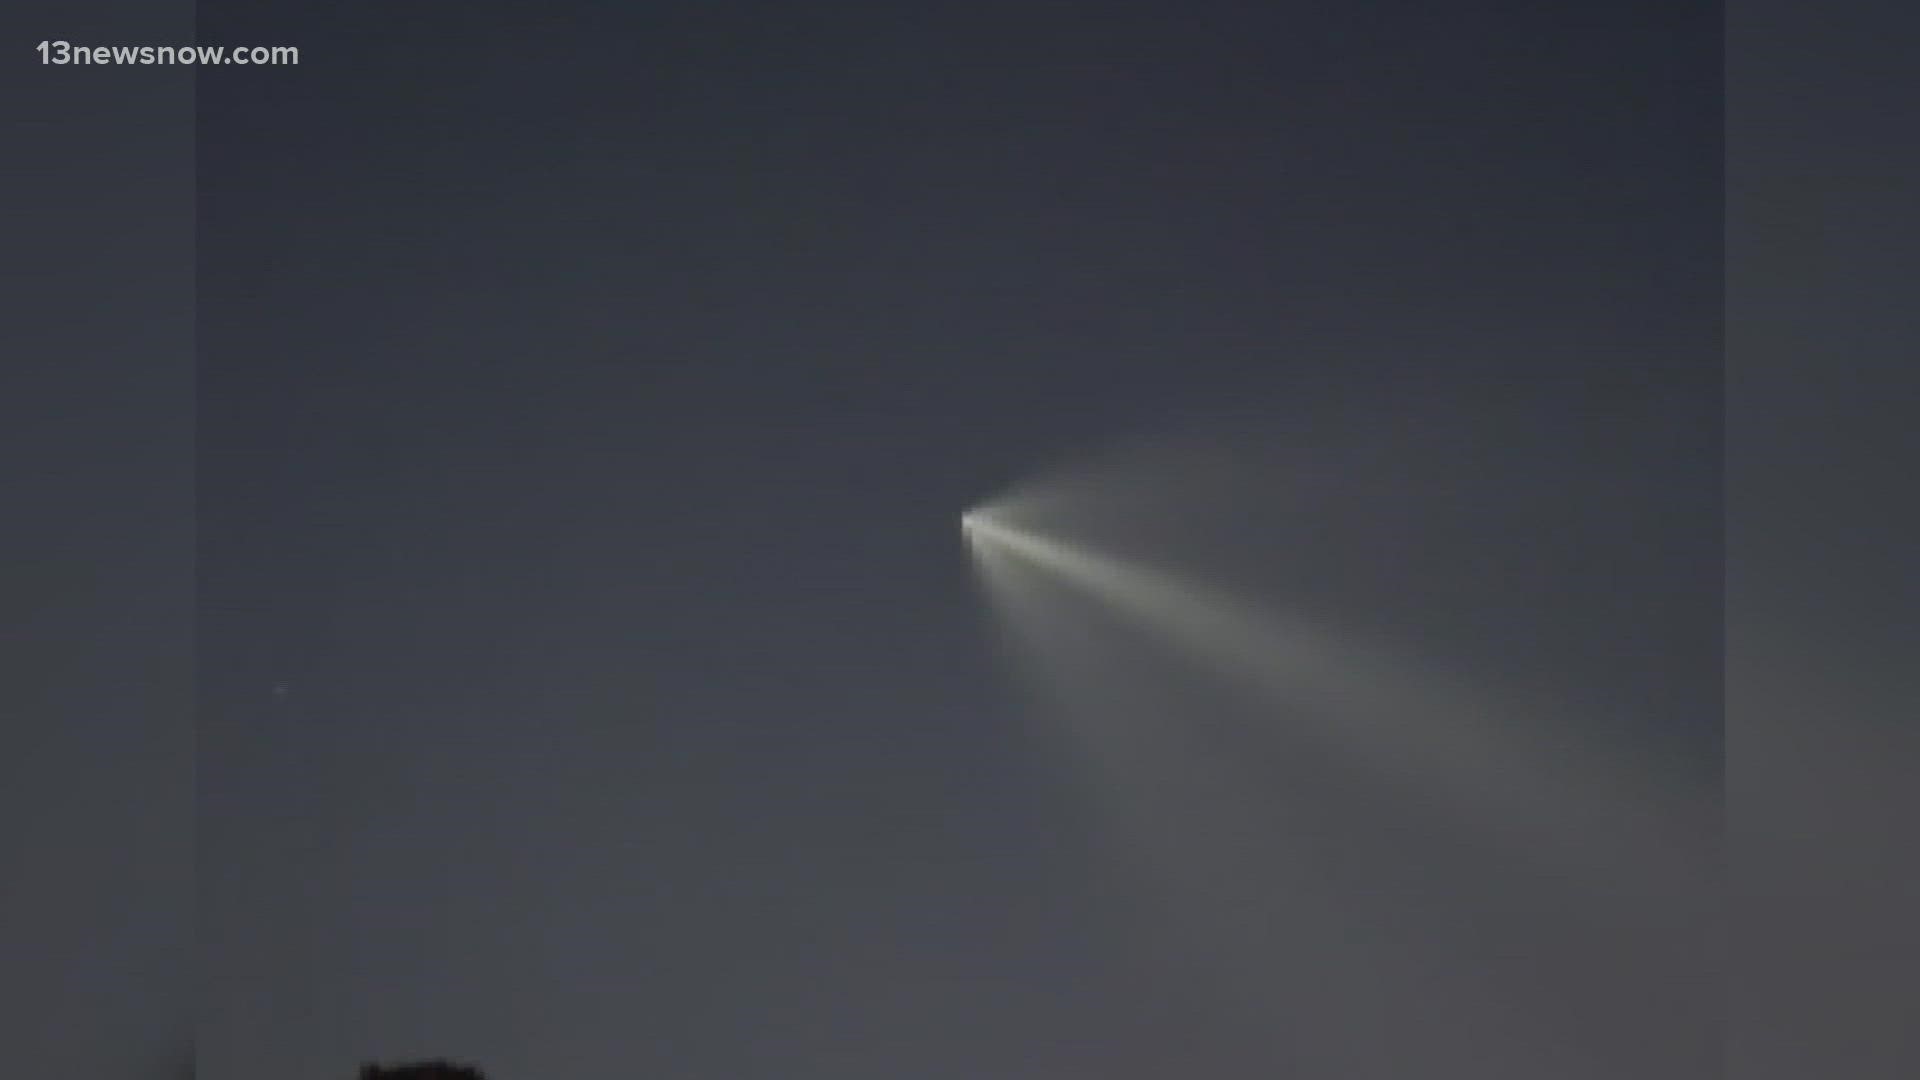 Many people contacted 13NewsNow to report this thinking it might be a meteor, but it's a Falcon 9 rocket carrying 52 Starlink satellites.